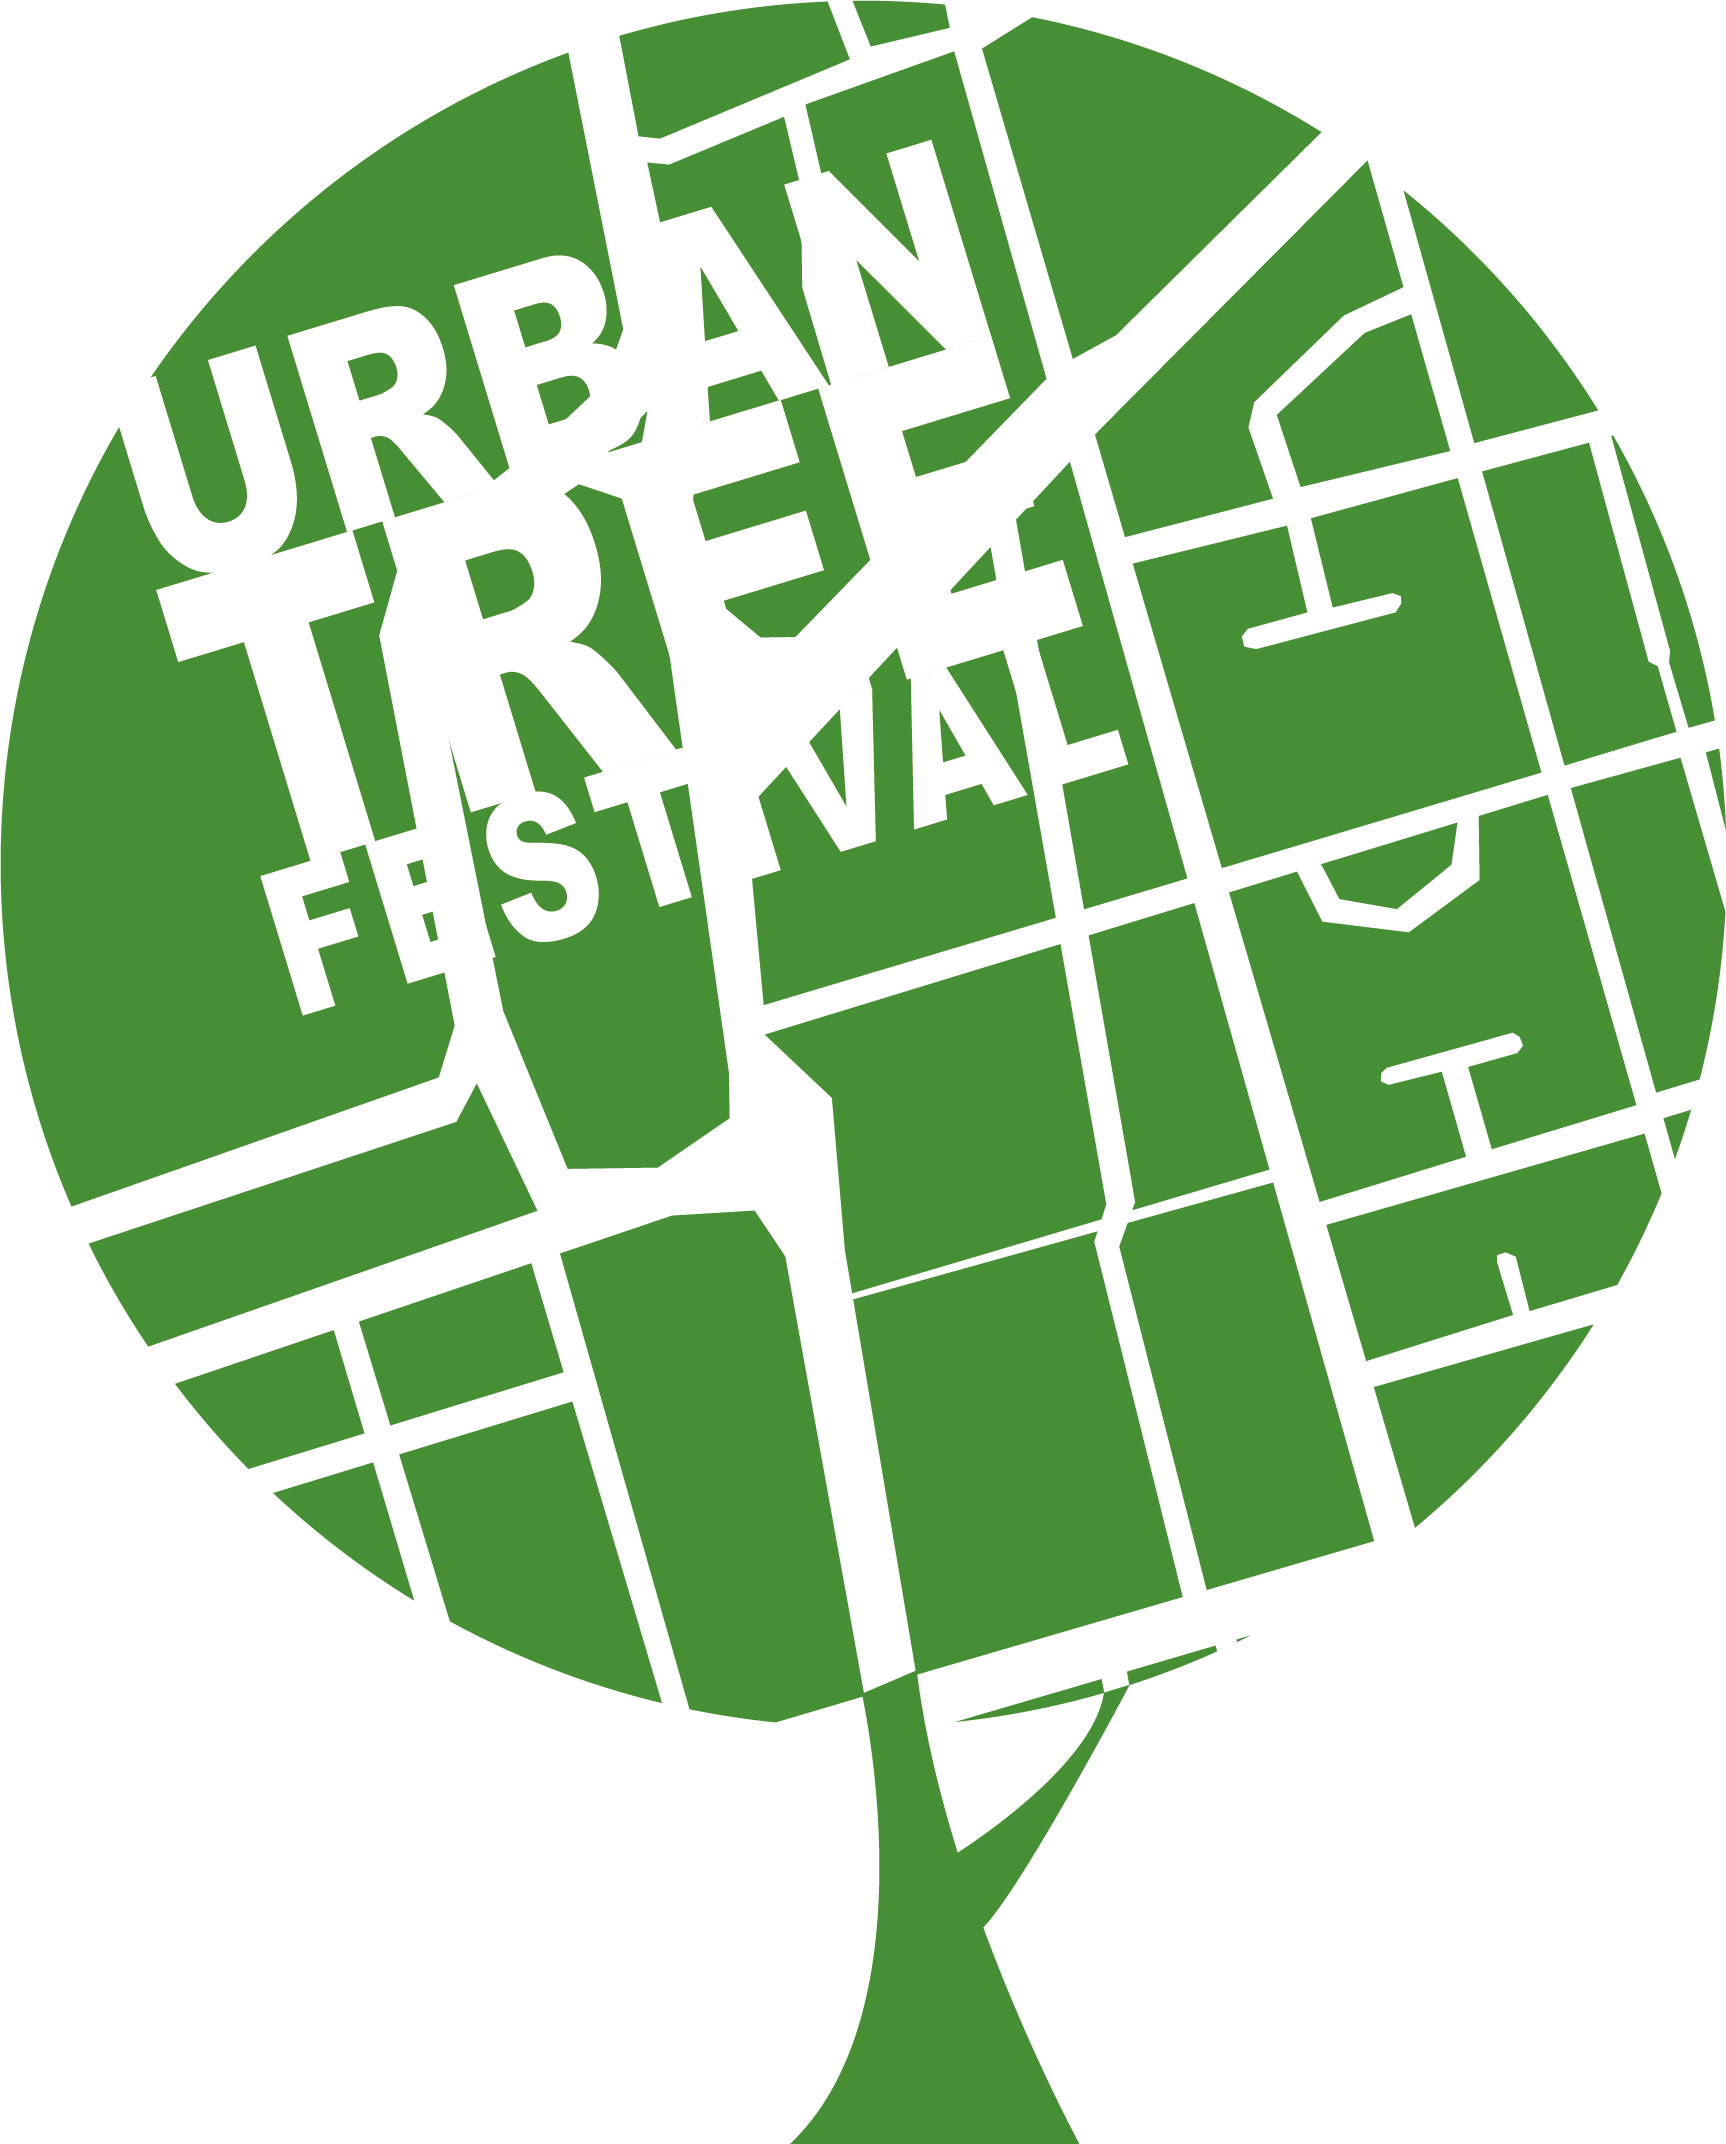 The Urban Tree Fextival